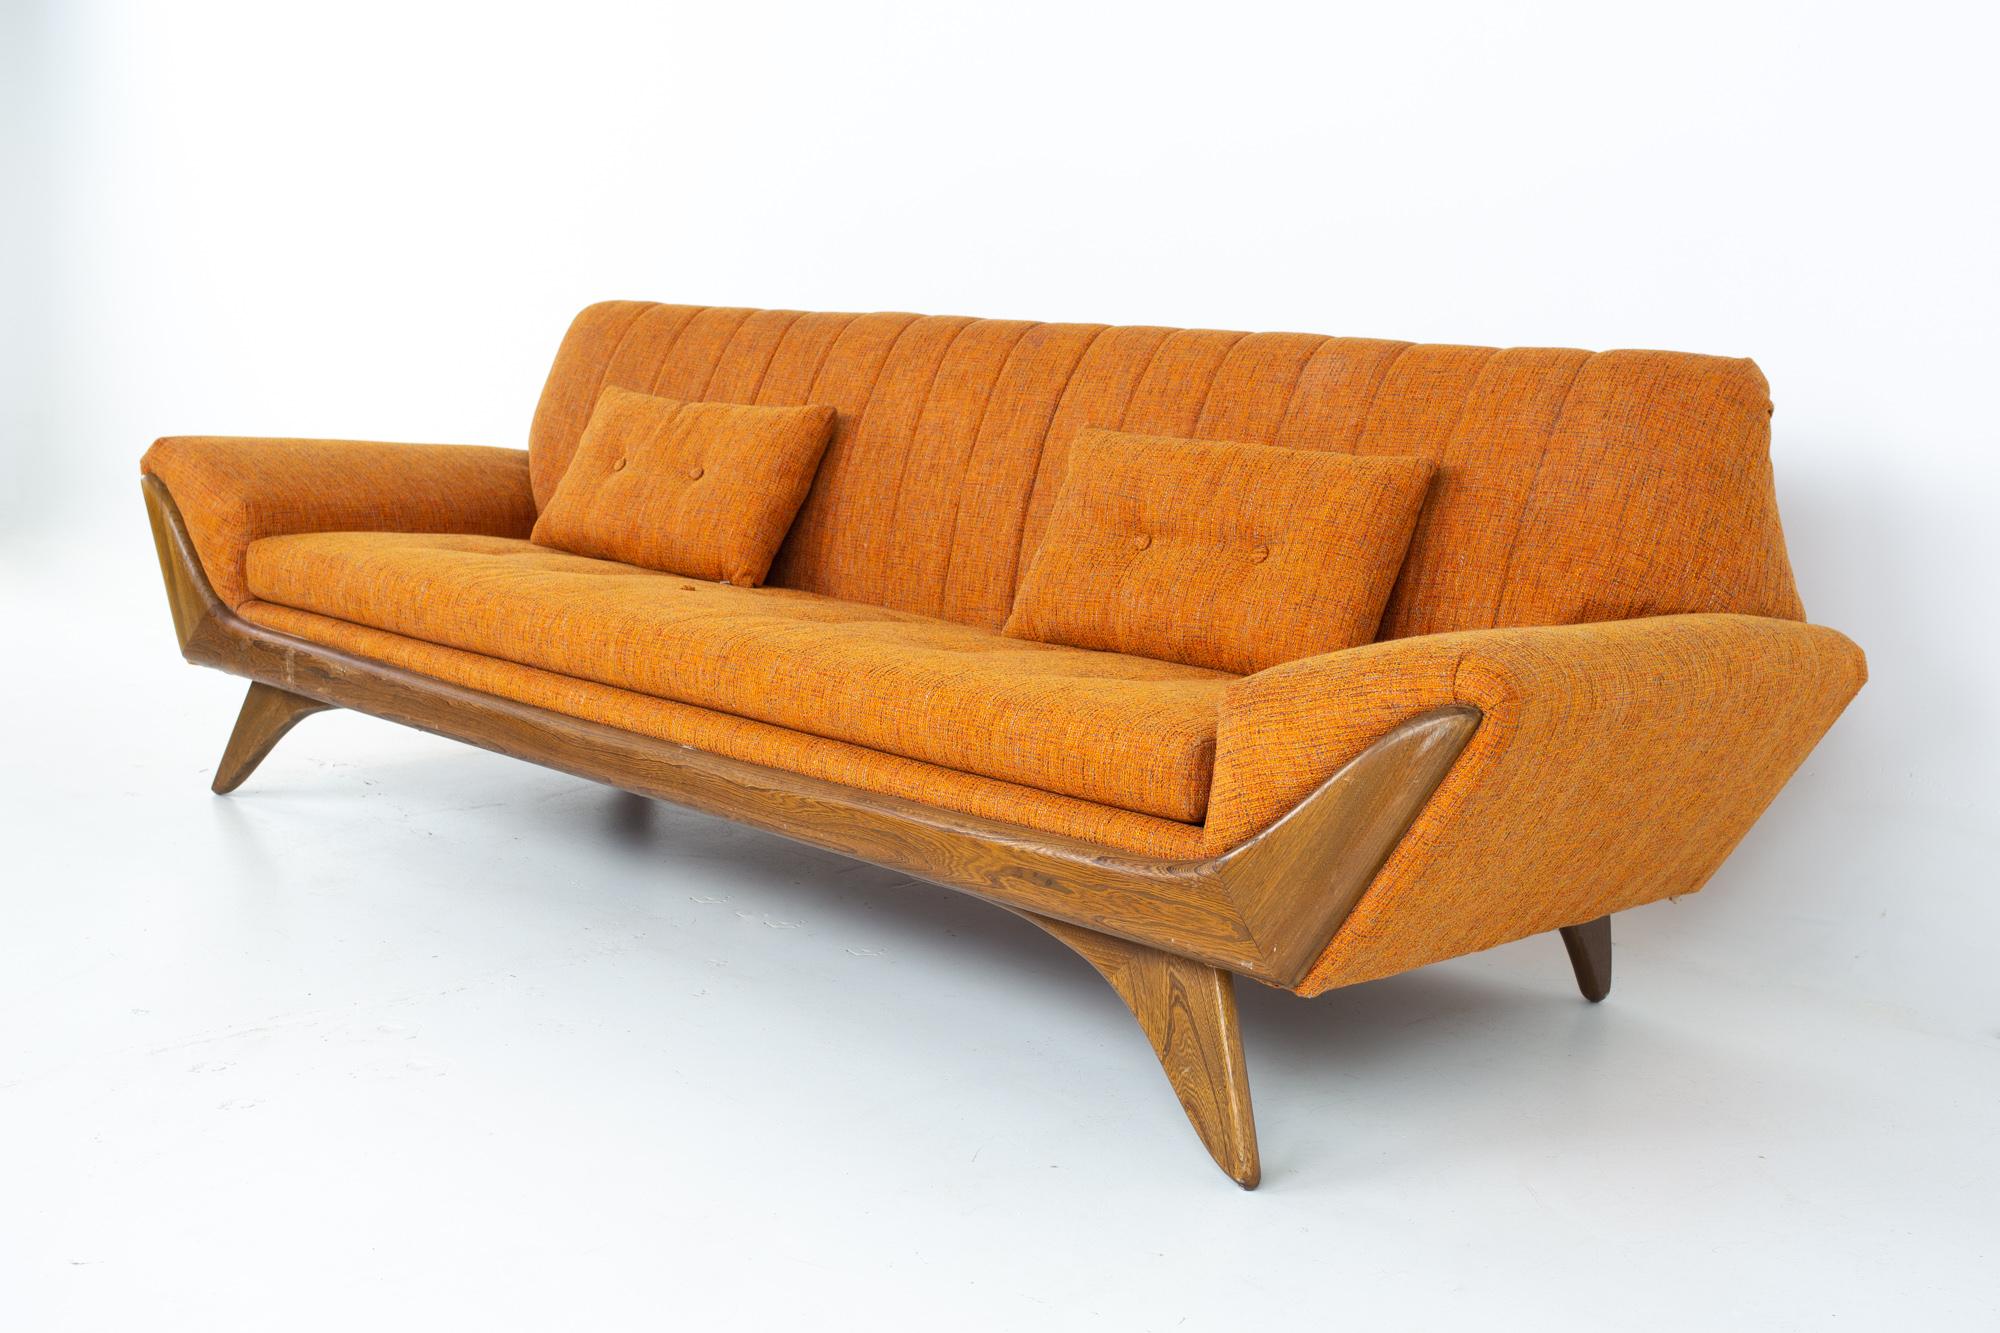 Adrian Pearsall style Kroehler midcentury re-upholstered orange gondola sofa
Sofa measures: 96 wide x 32 deep x 29 high, with a seat height of 16 inches 

All pieces of furniture can be had in what we call restored vintage condition. That means